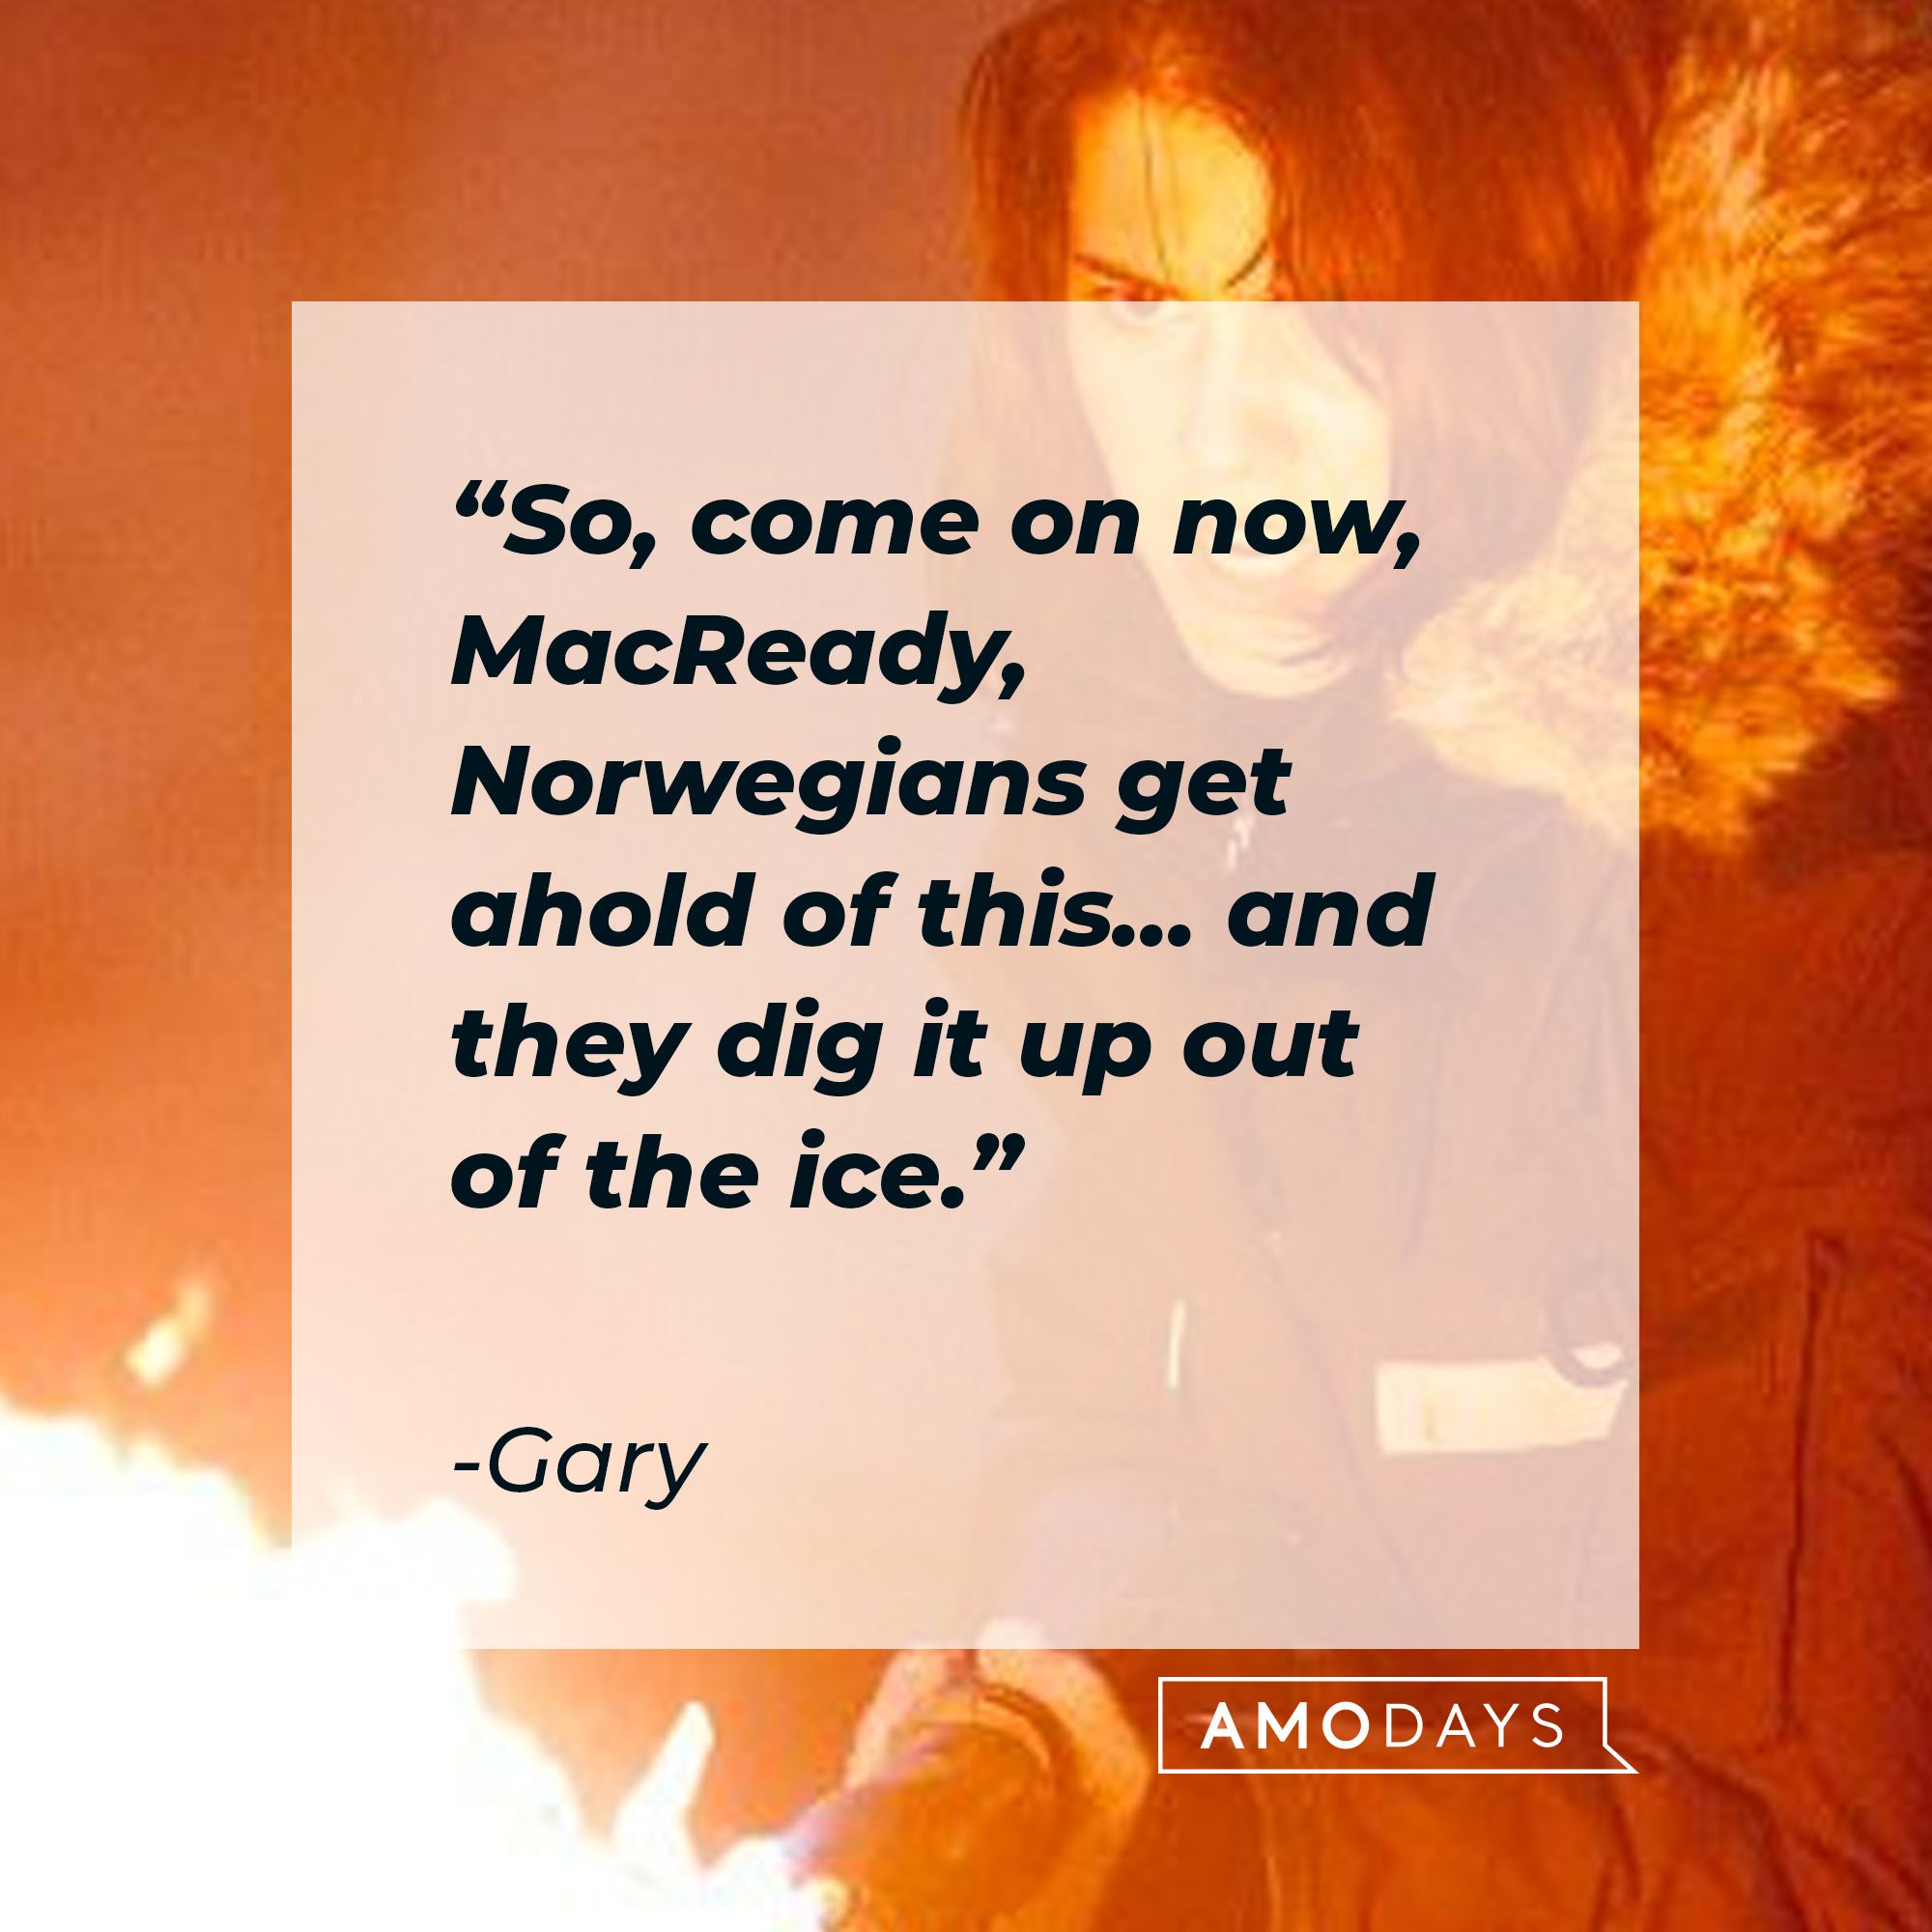 Gary's quote: "So, come on now, MacReady, Norwegians get ahold of this... and they dig it up out of the ice." | Source: facebook.com/thethingmovie